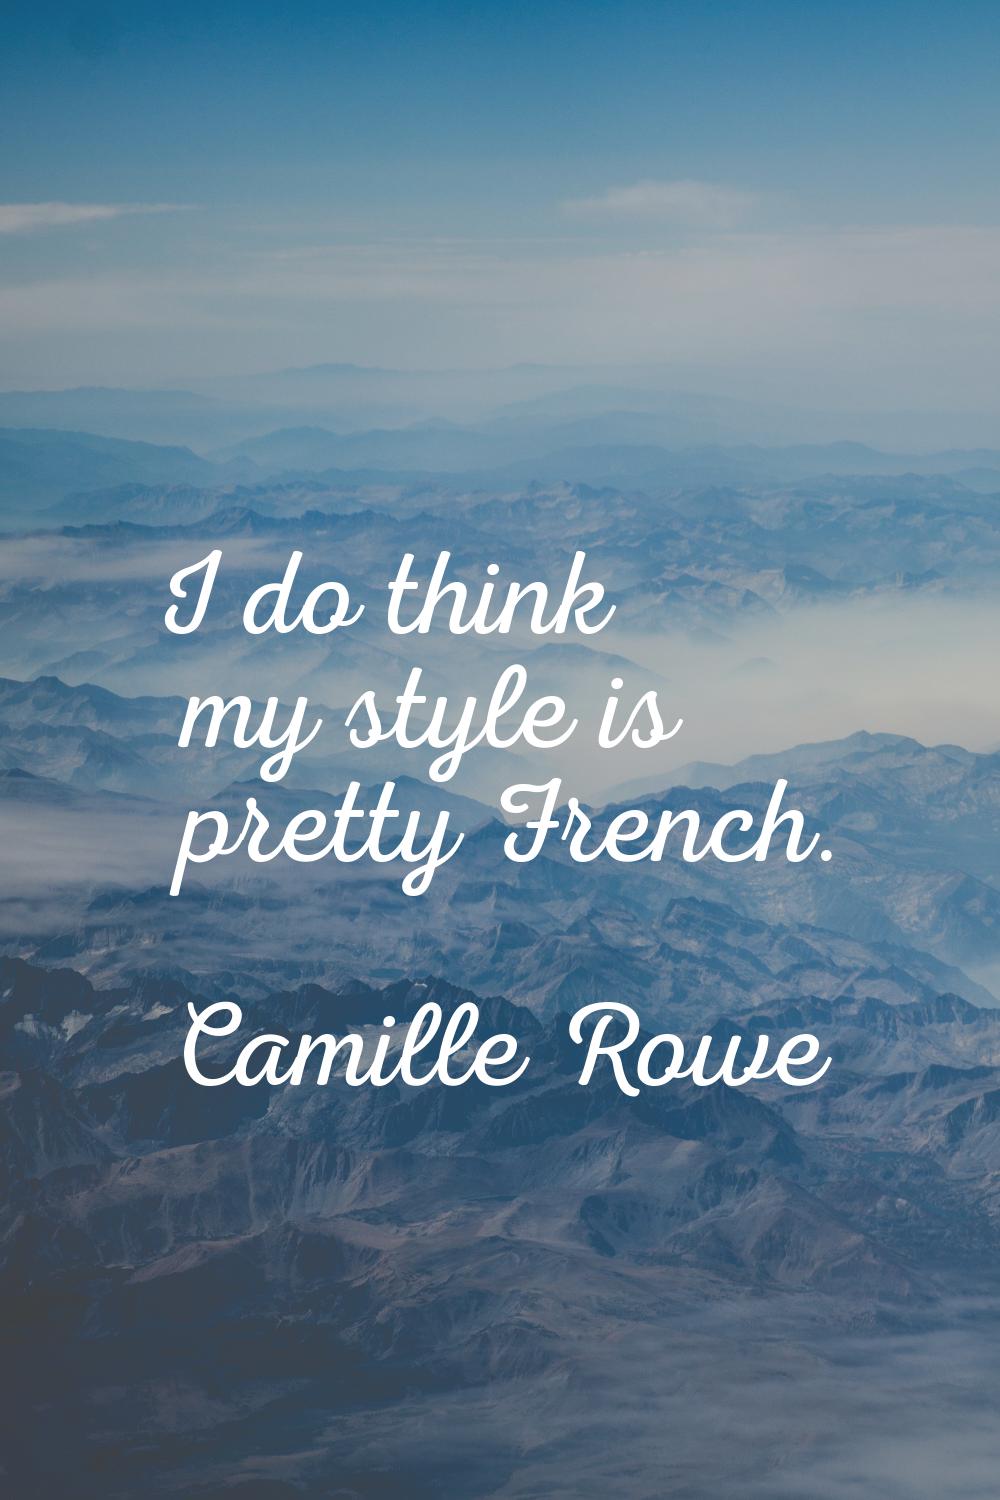 I do think my style is pretty French.